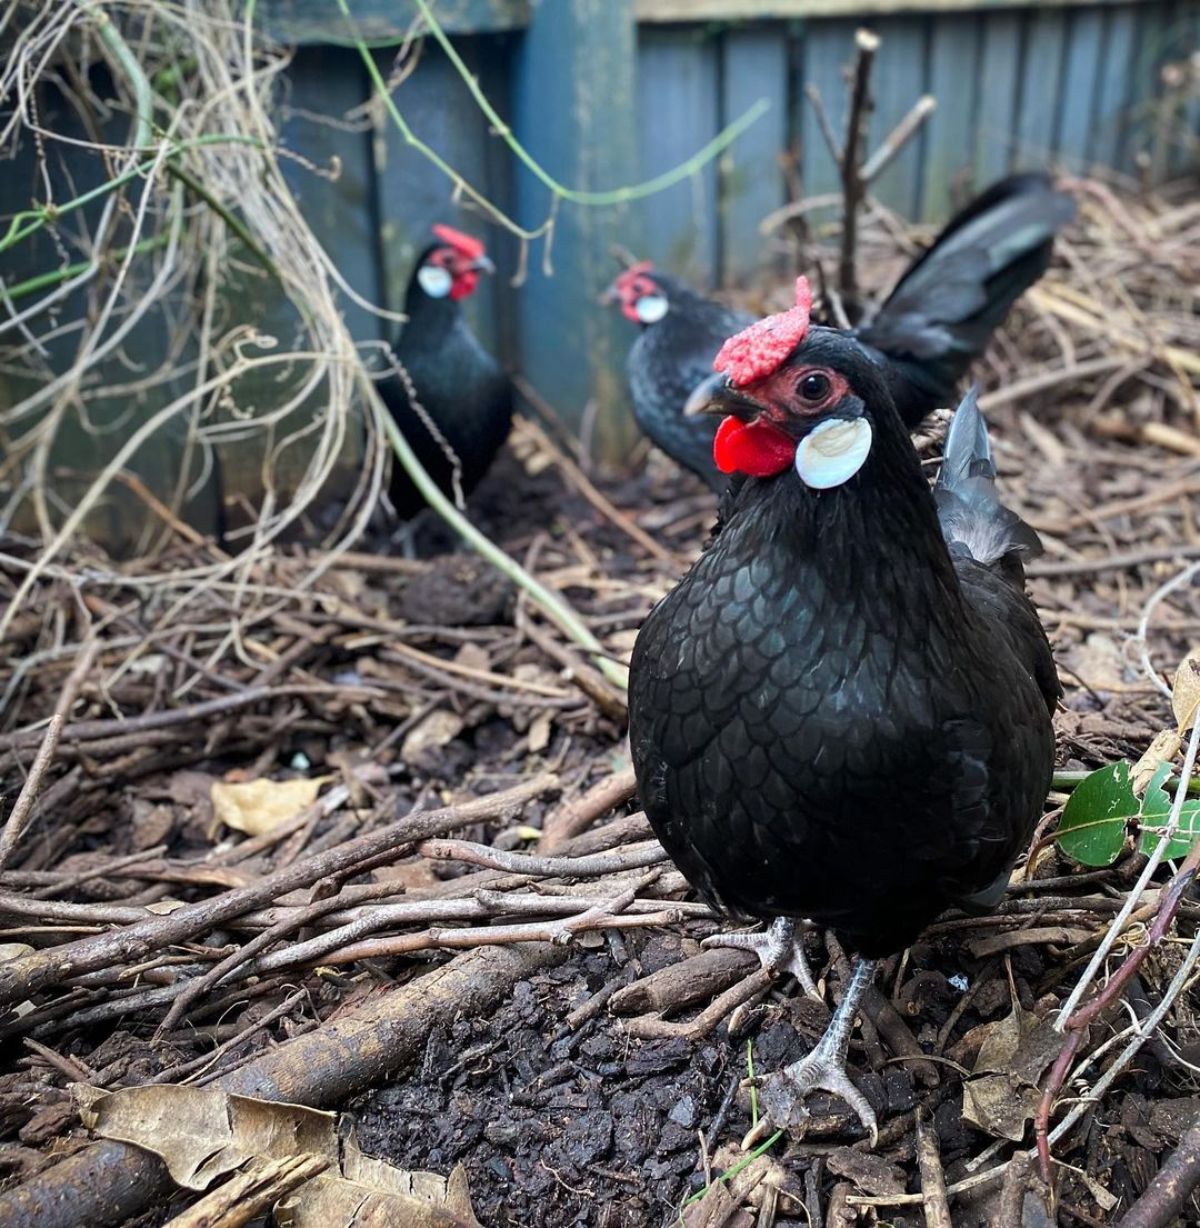 Three adorable Rosecomb hens wandering in a backyard.